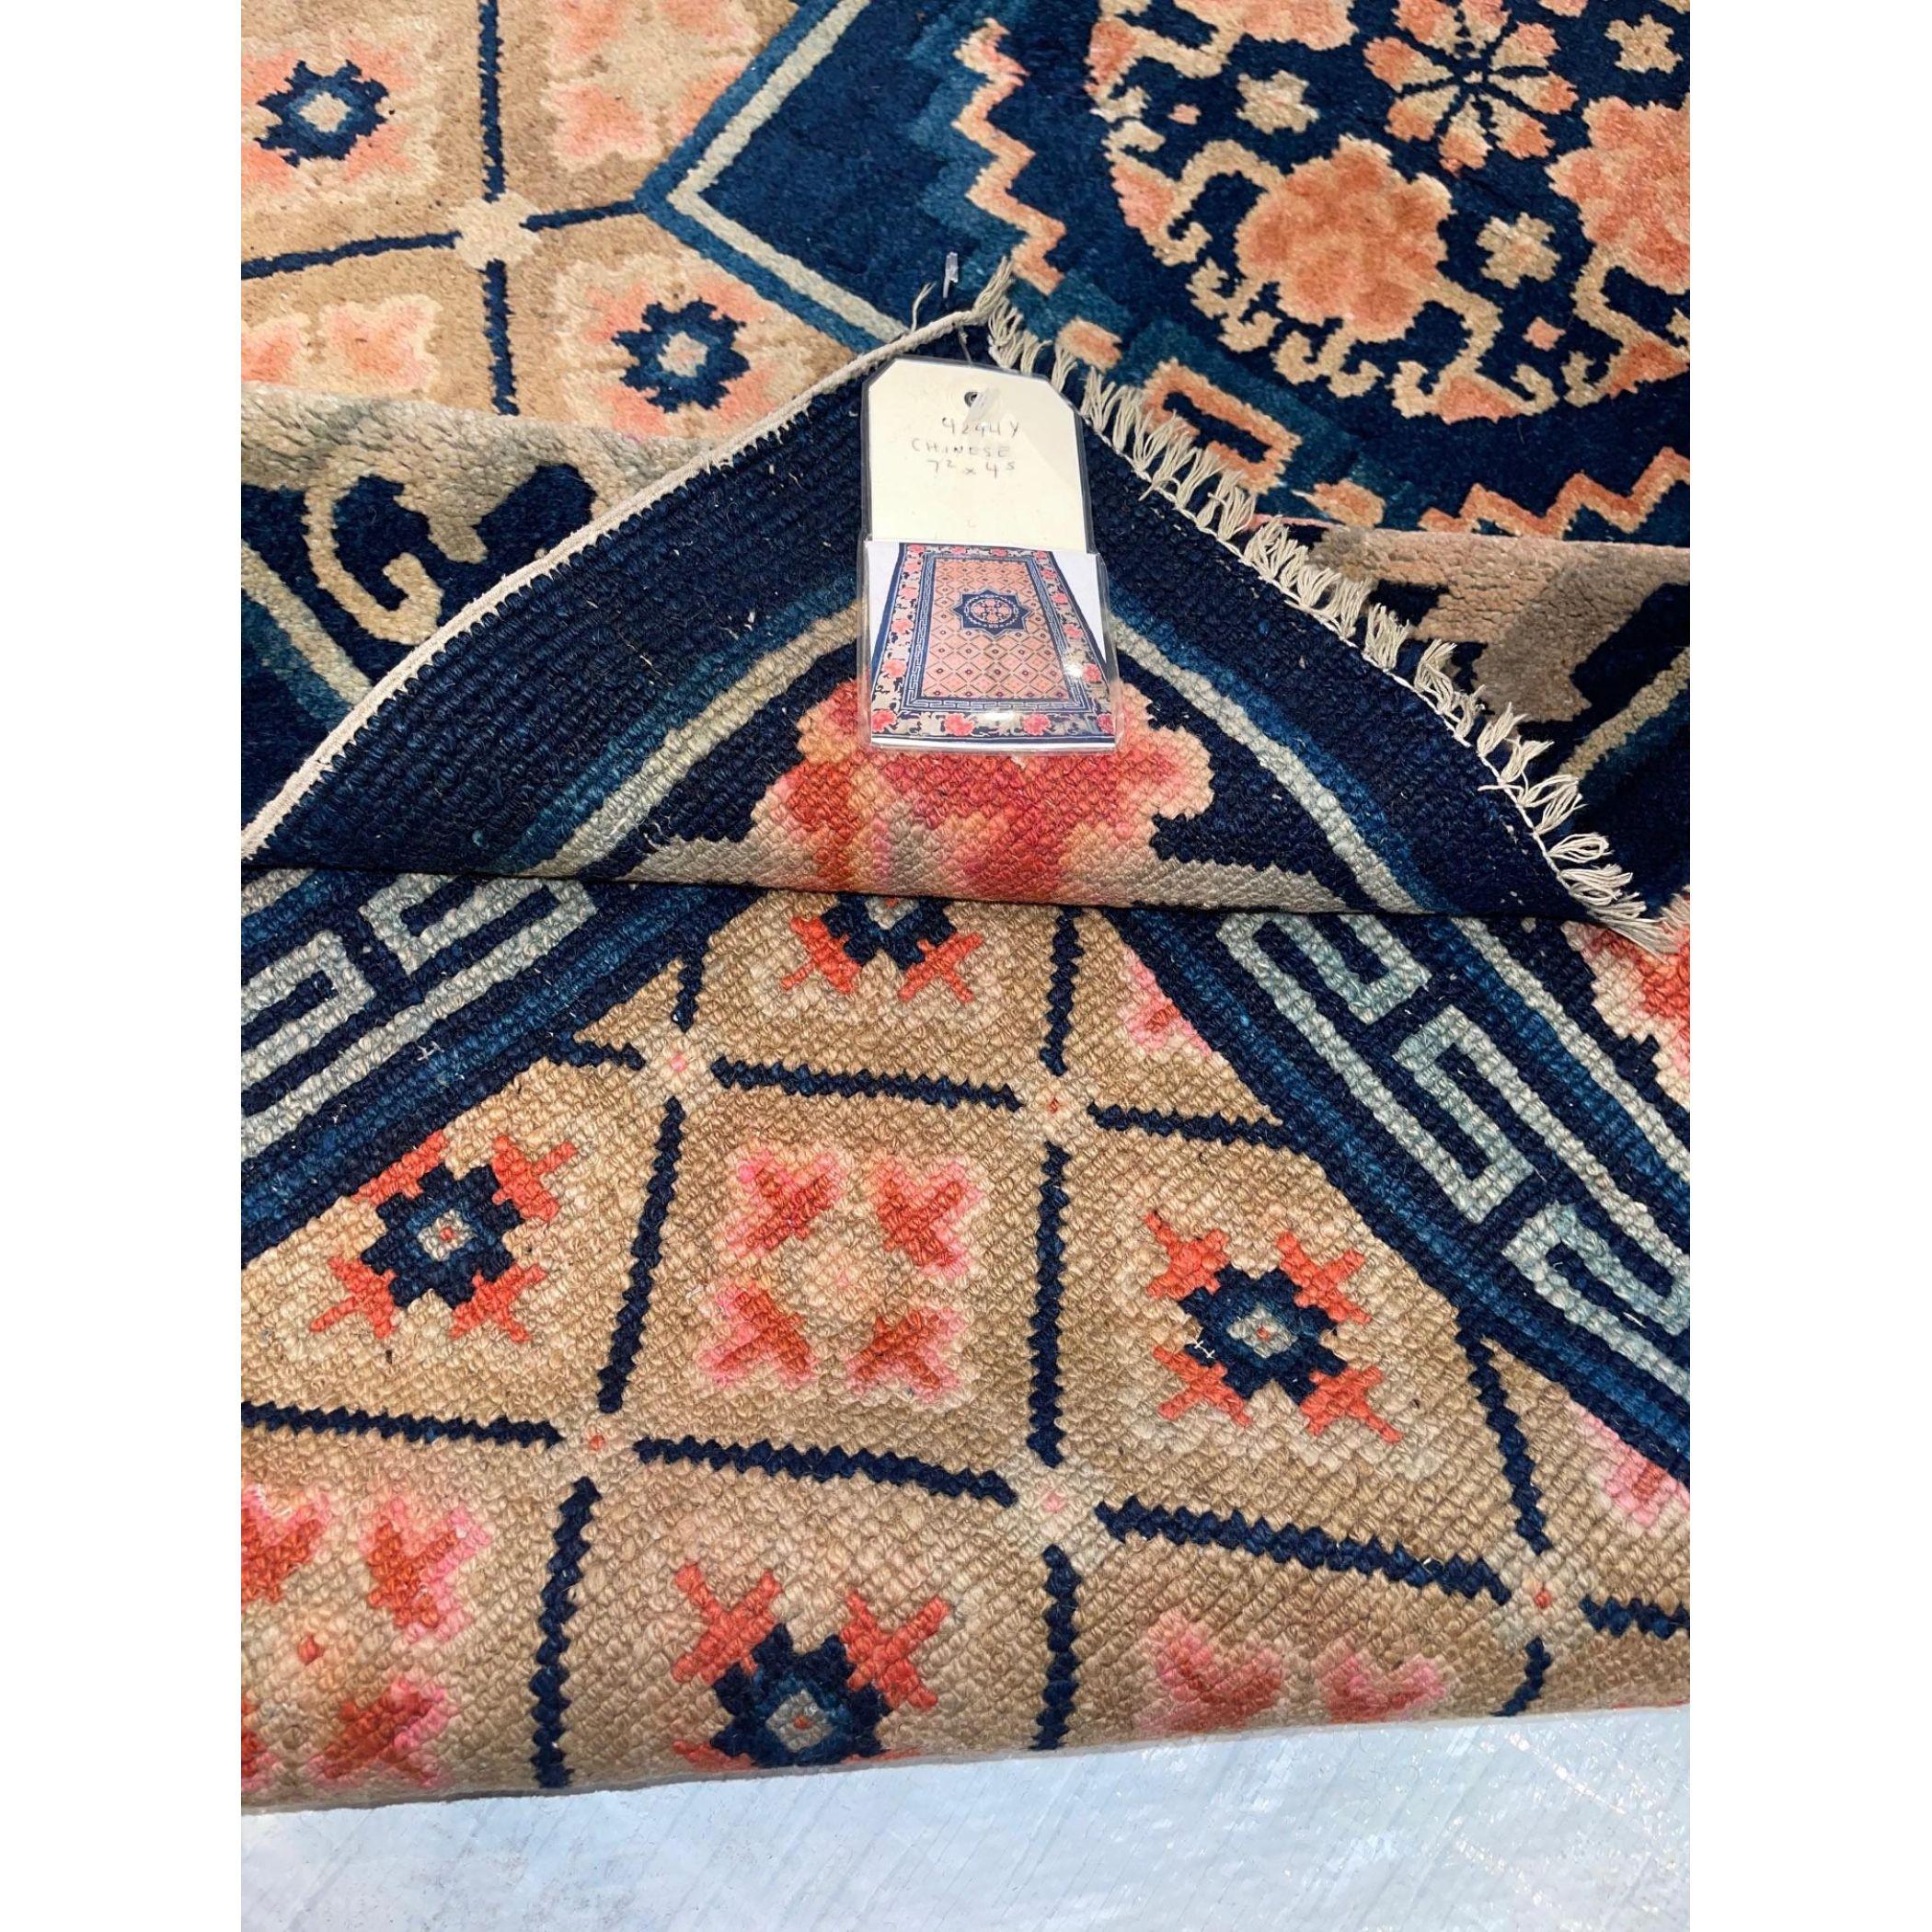 Asian 1900s Antique Chinese Small Rug - 7'2'' X 4'5'' For Sale